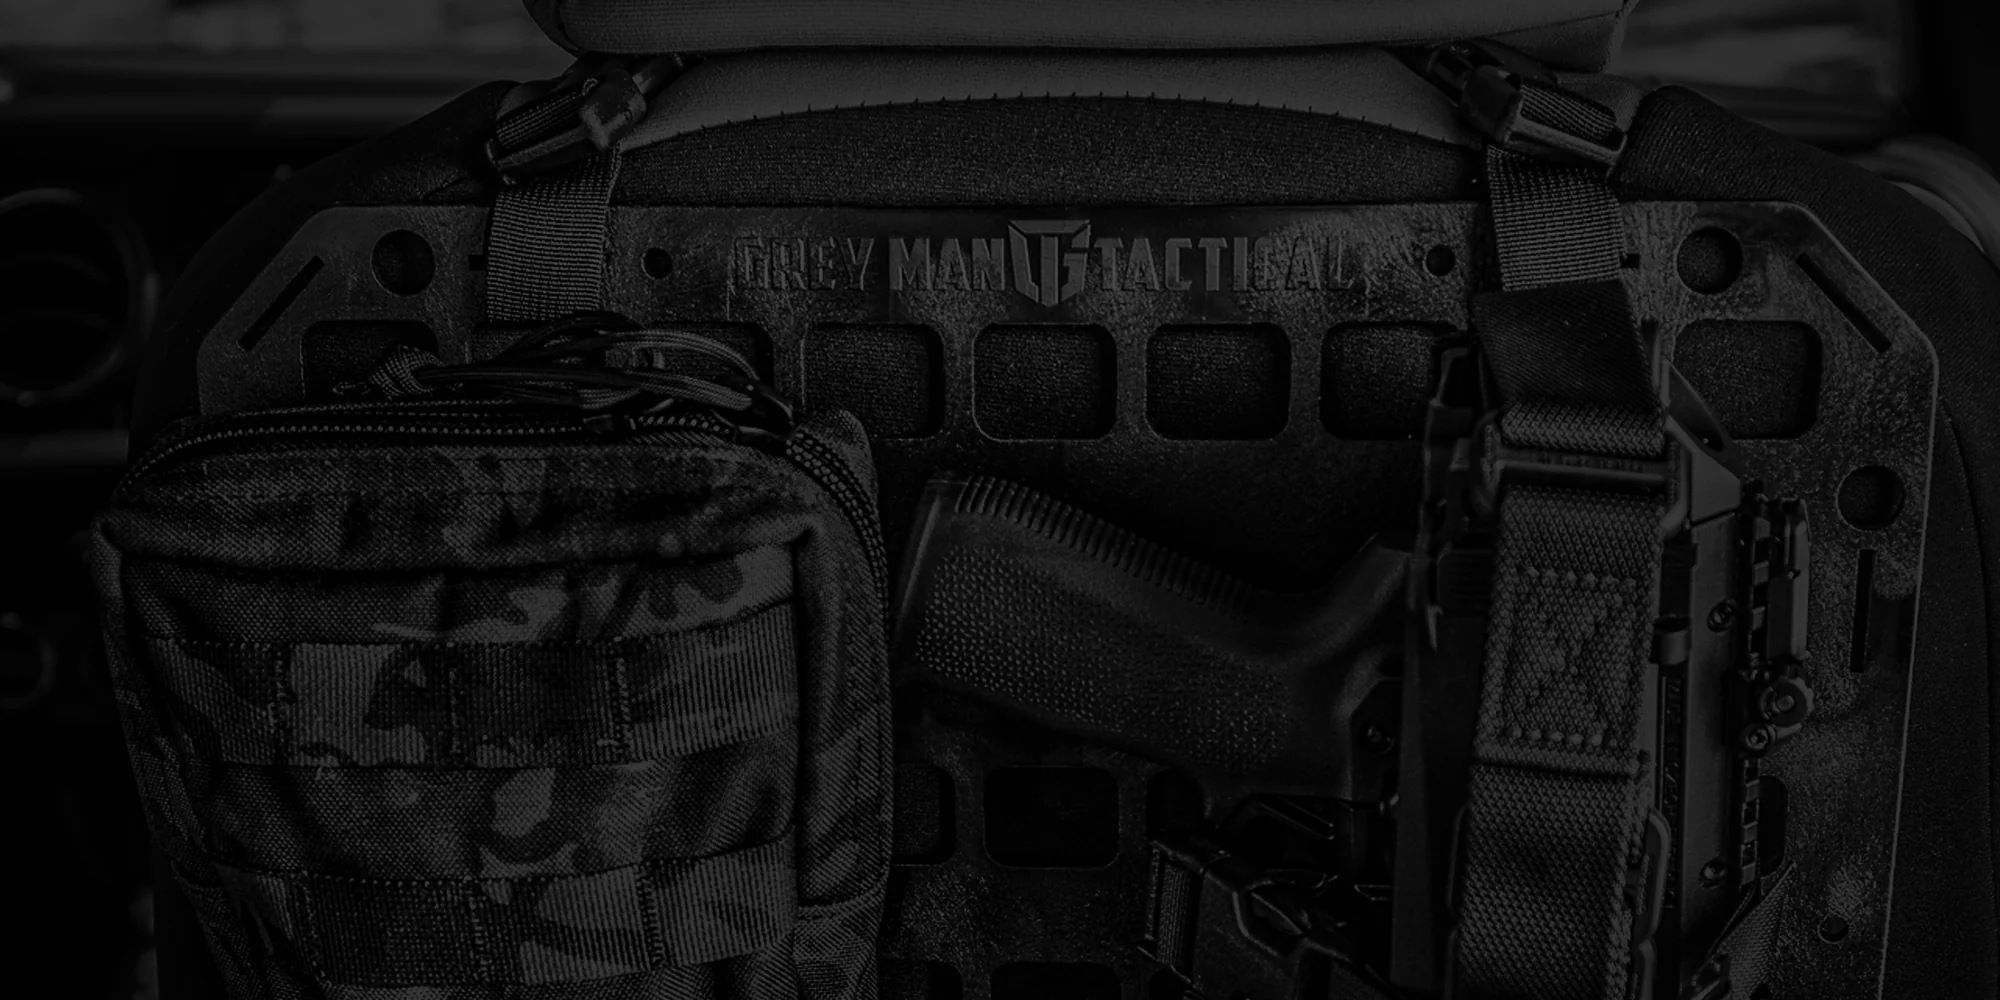 Gray Man Tactical Gear Organization for Home and Vehicle